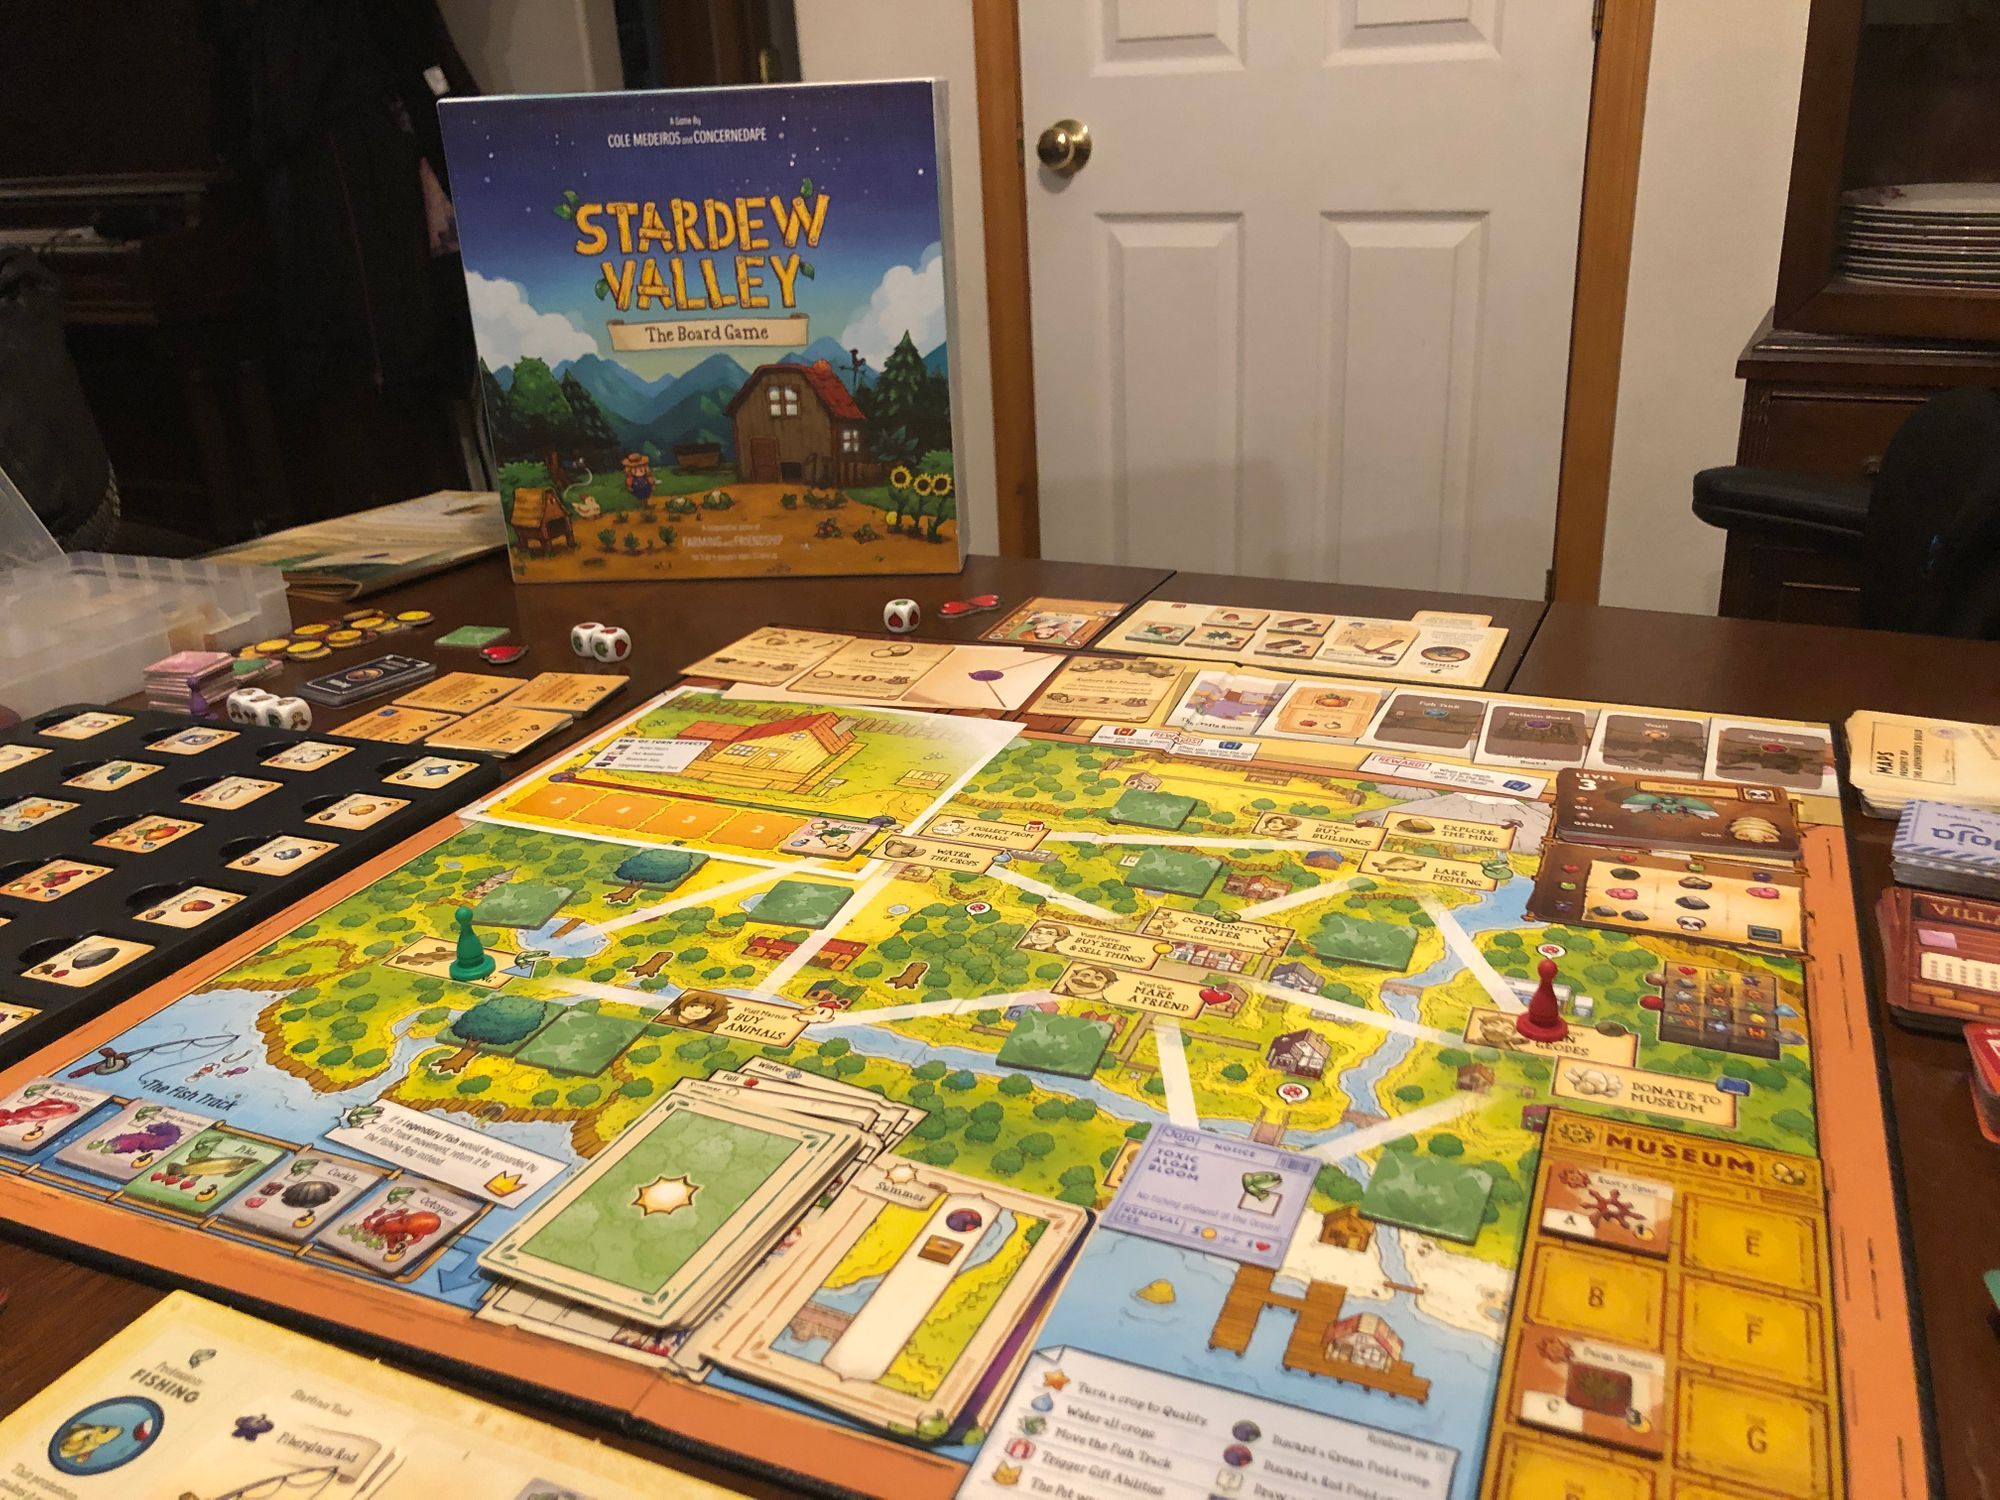 Stardew Valley - Stardew Valley: The Board Game (Available Now!)